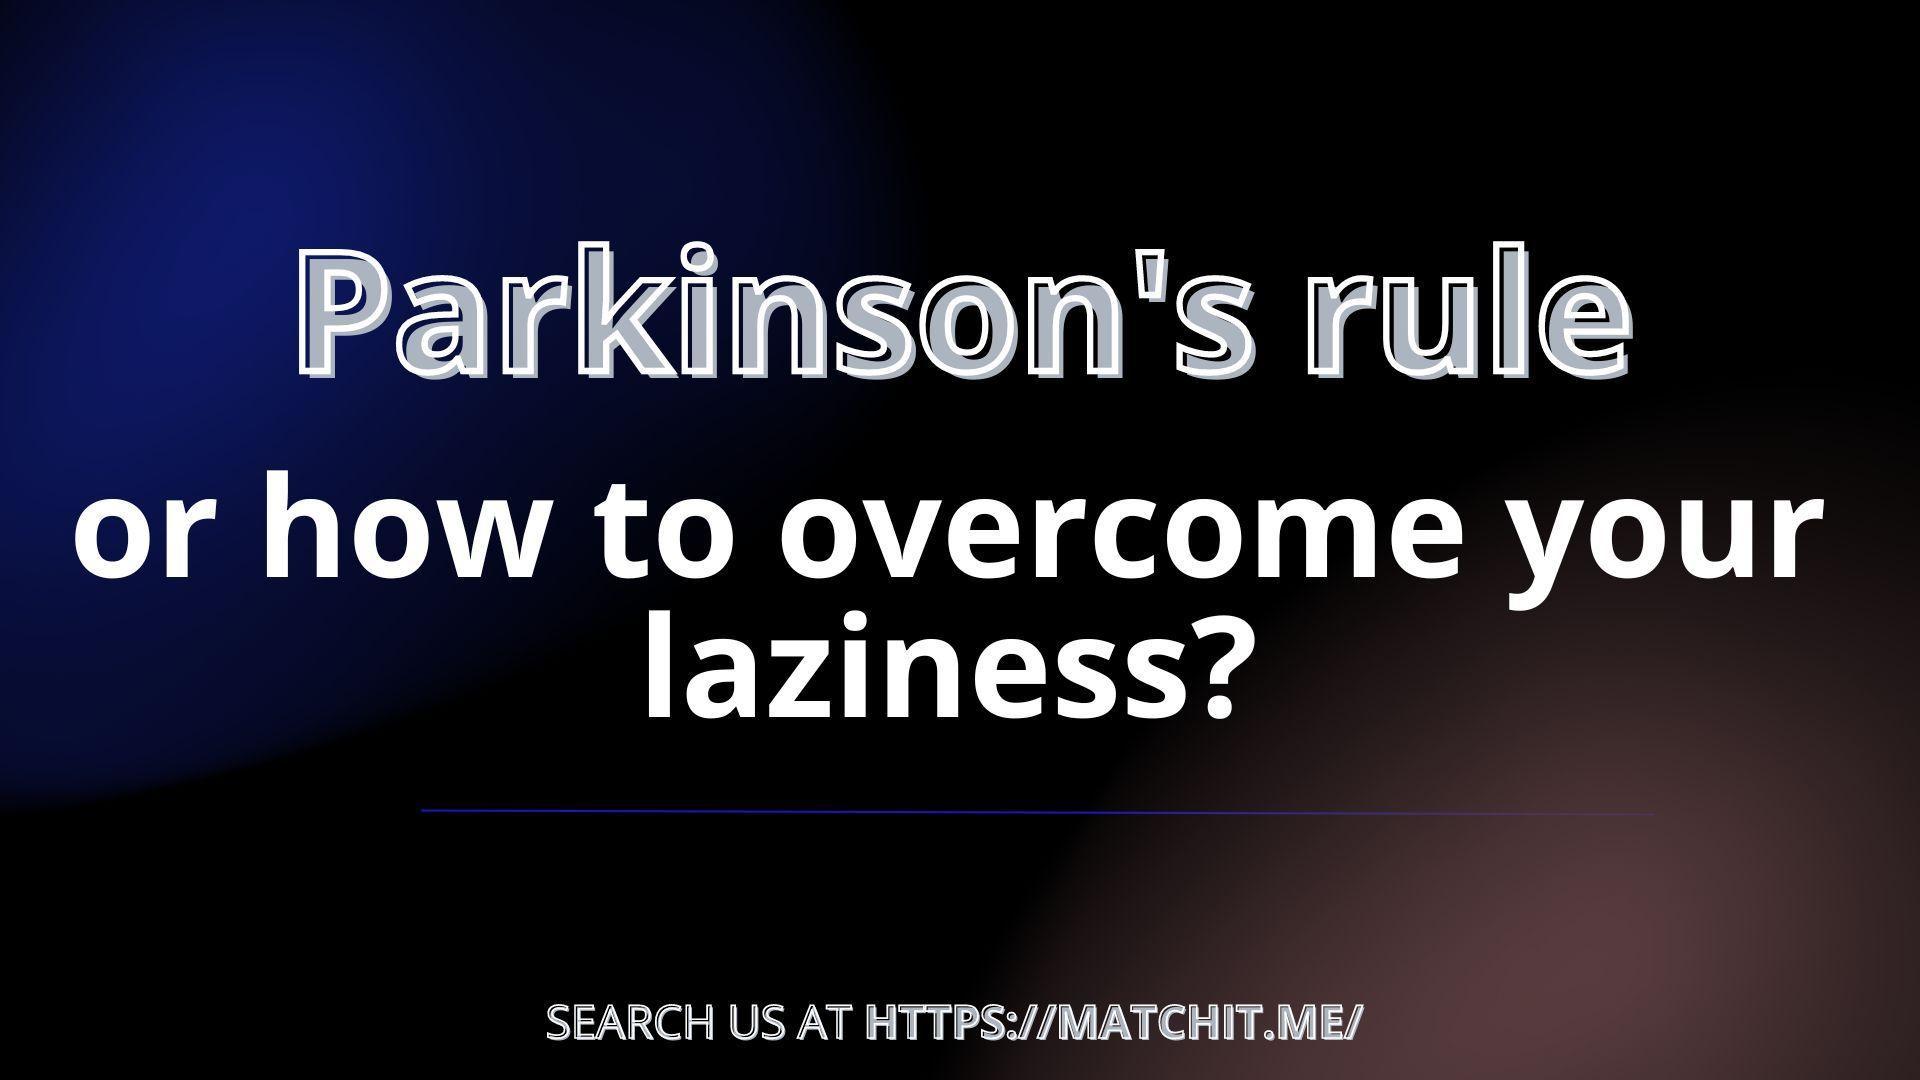 Parkinson's rule, or how to overcome your laziness?